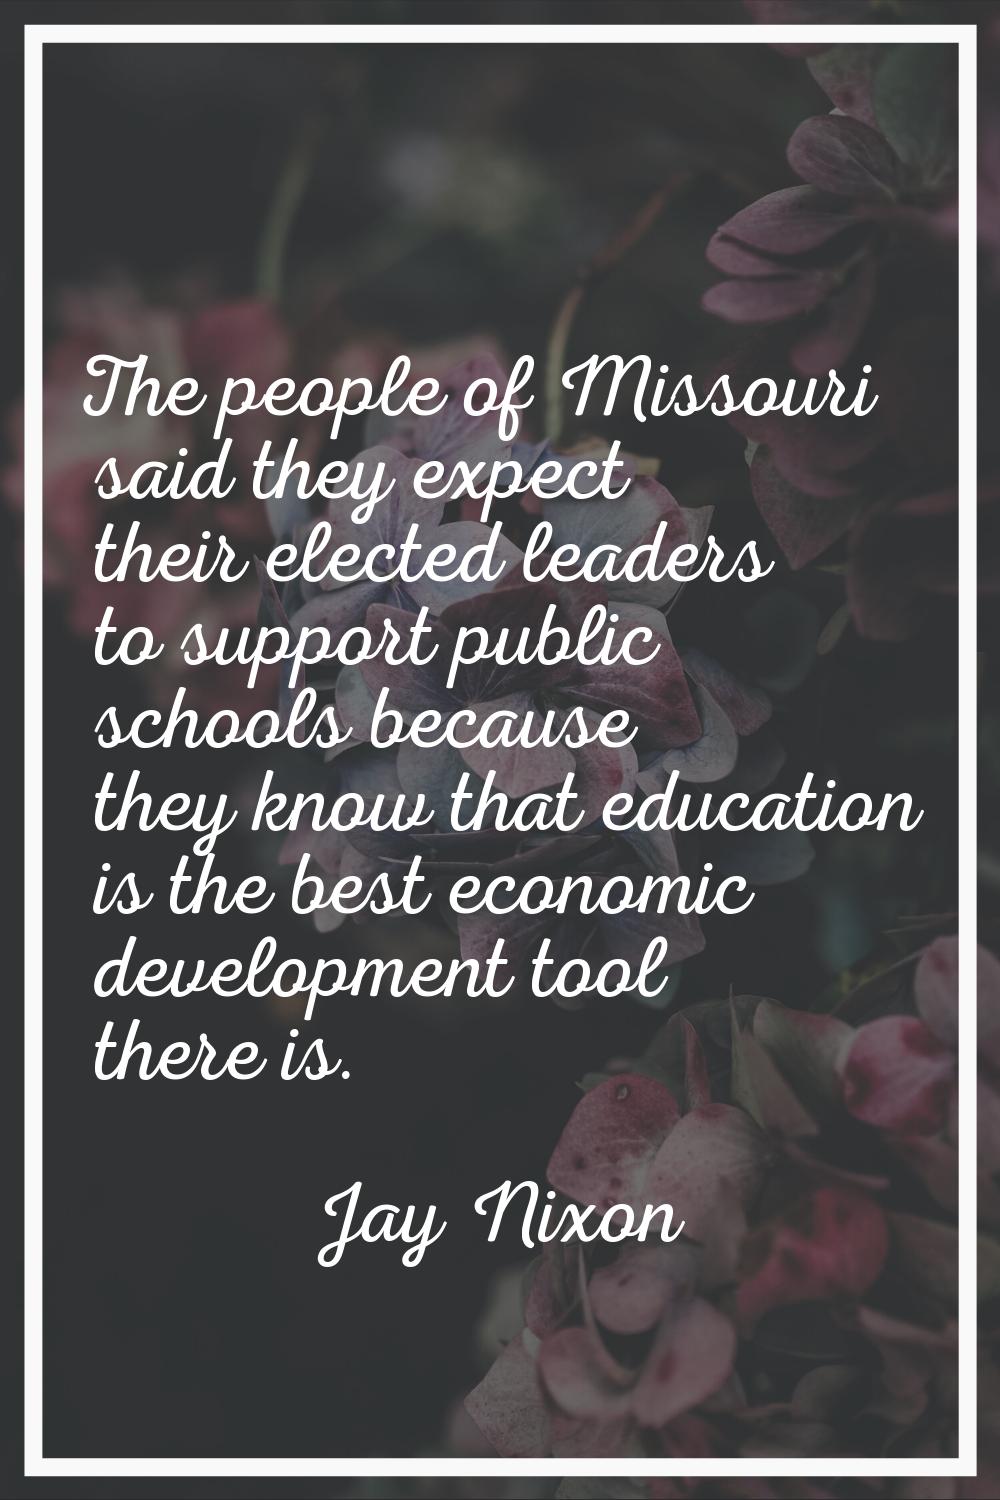 The people of Missouri said they expect their elected leaders to support public schools because the